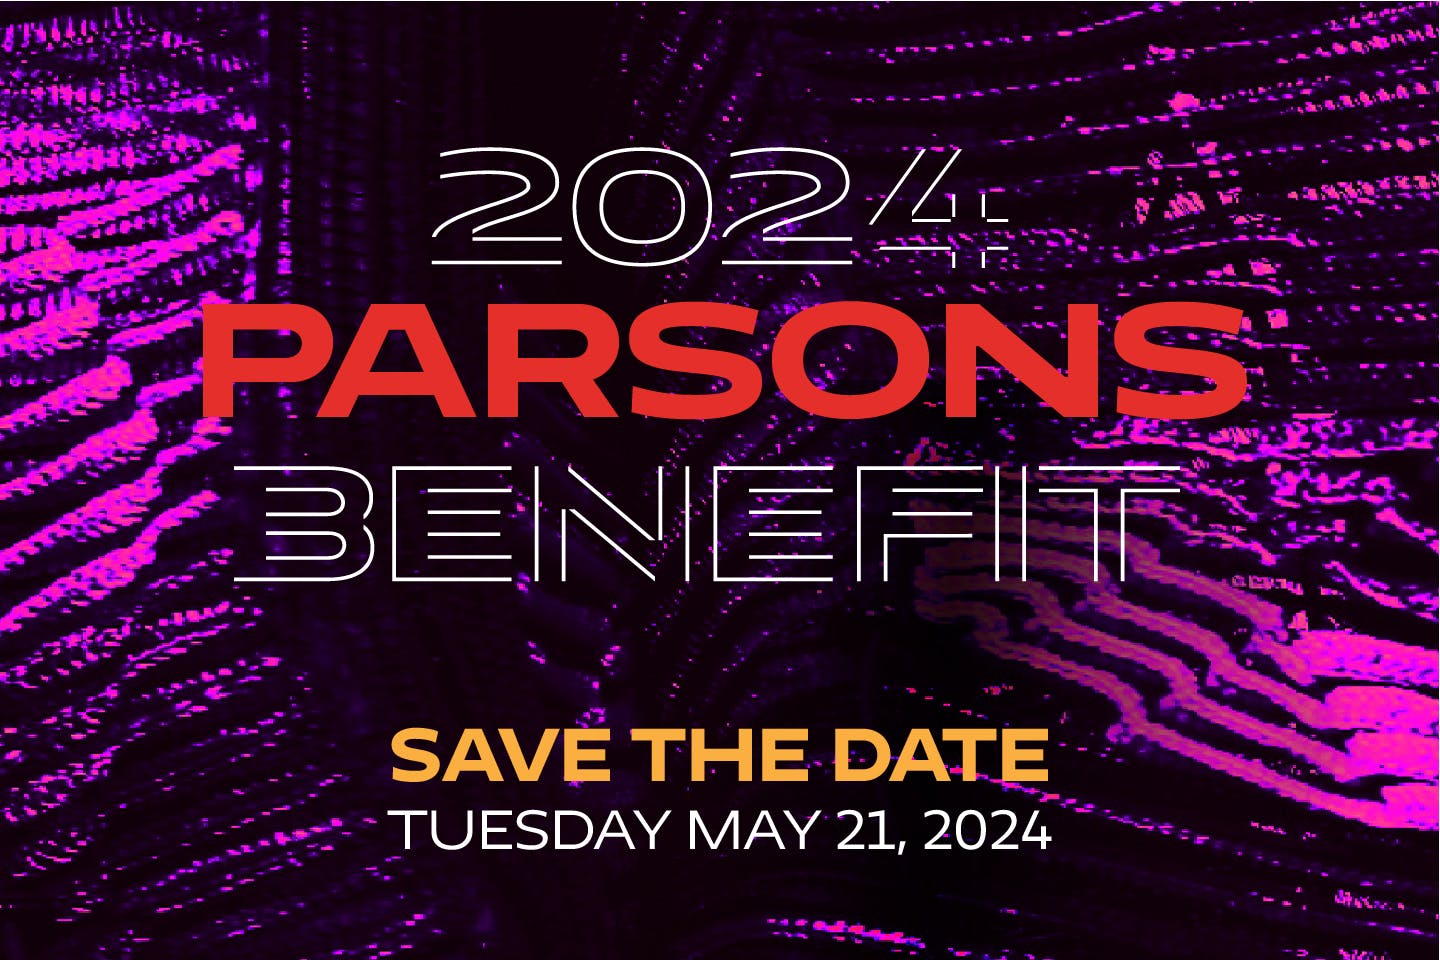 Parsons Benifit - Save the Date 2023